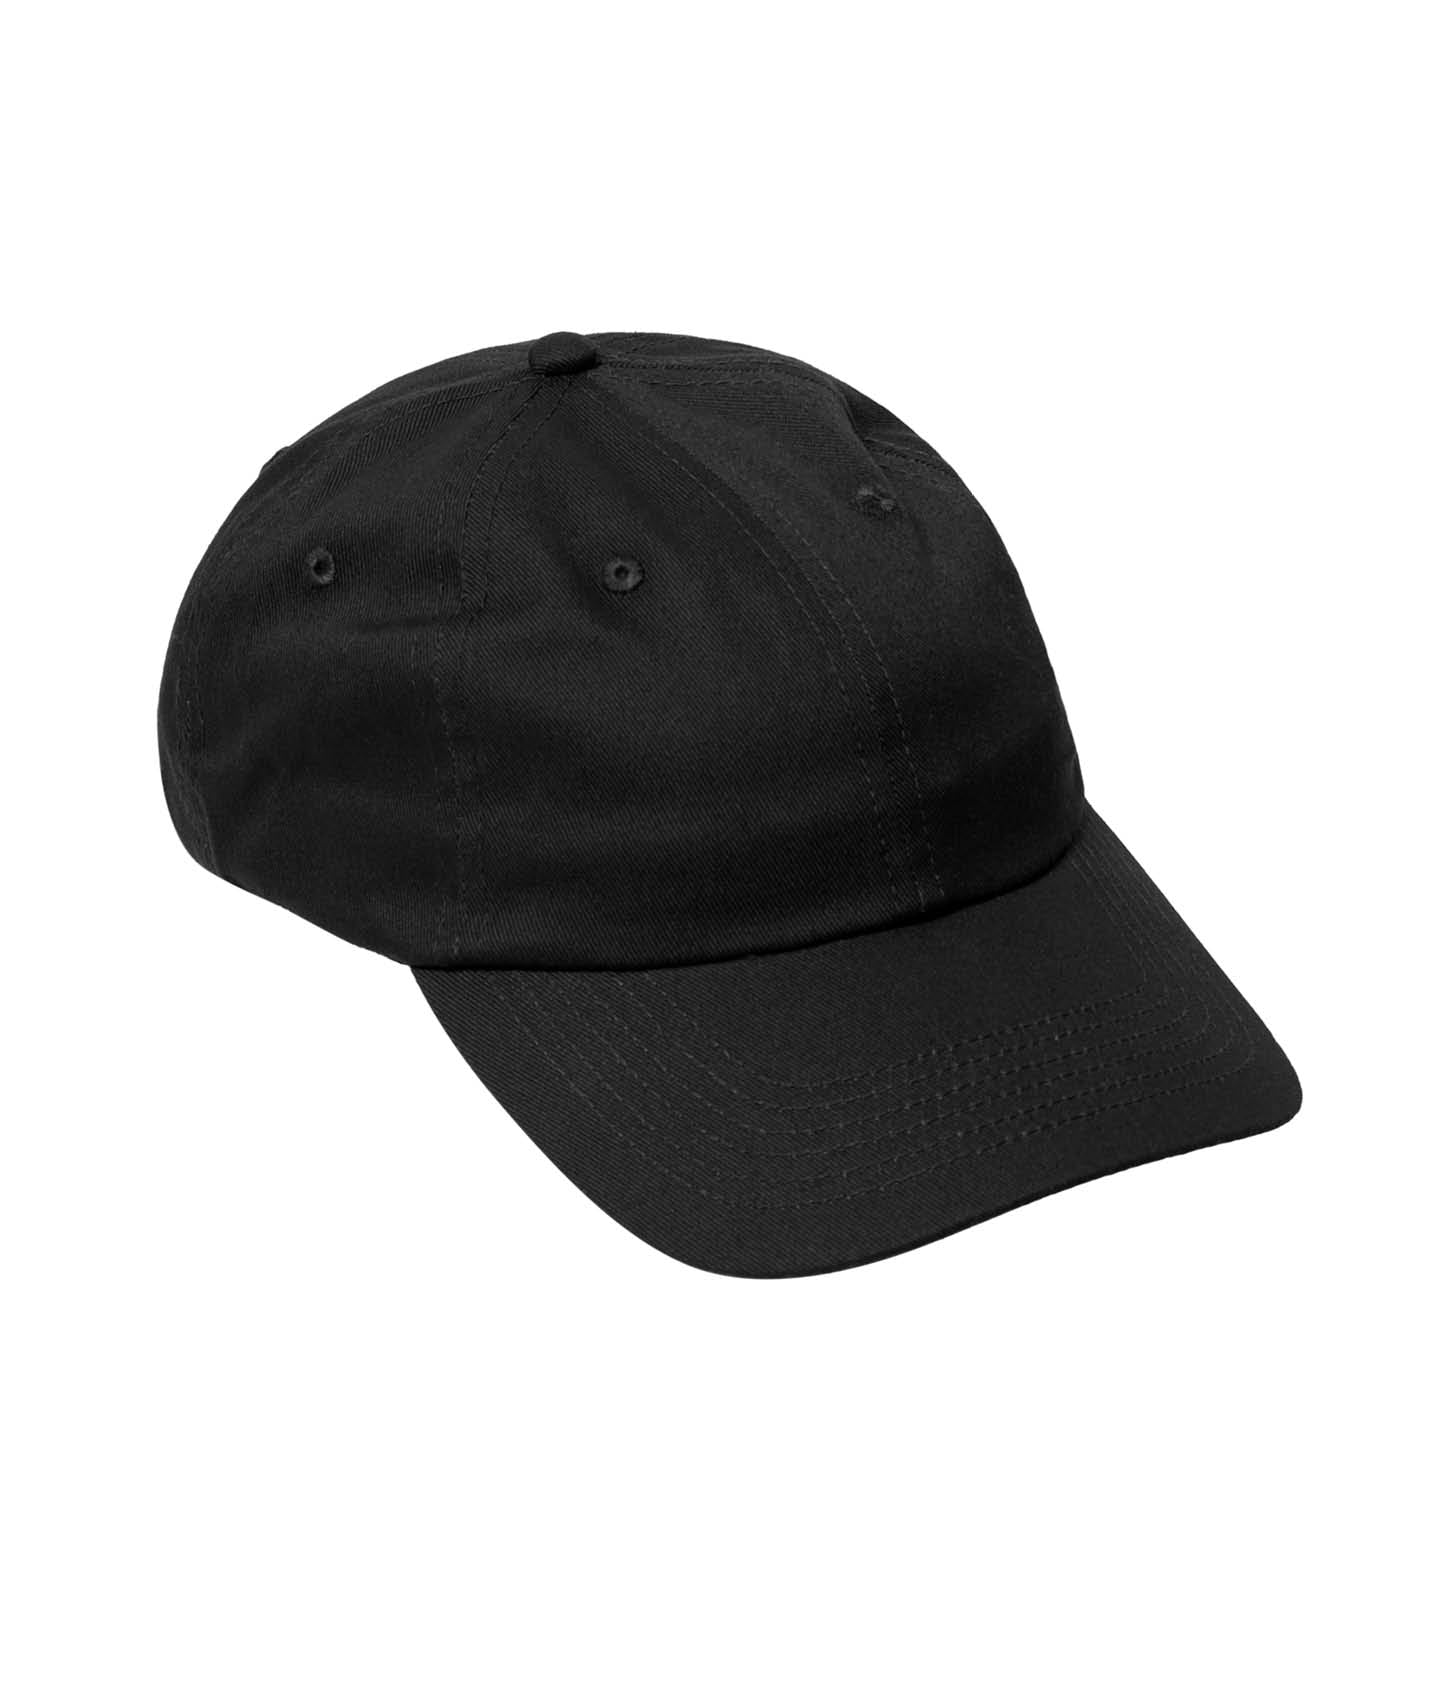 The Everyday Hat